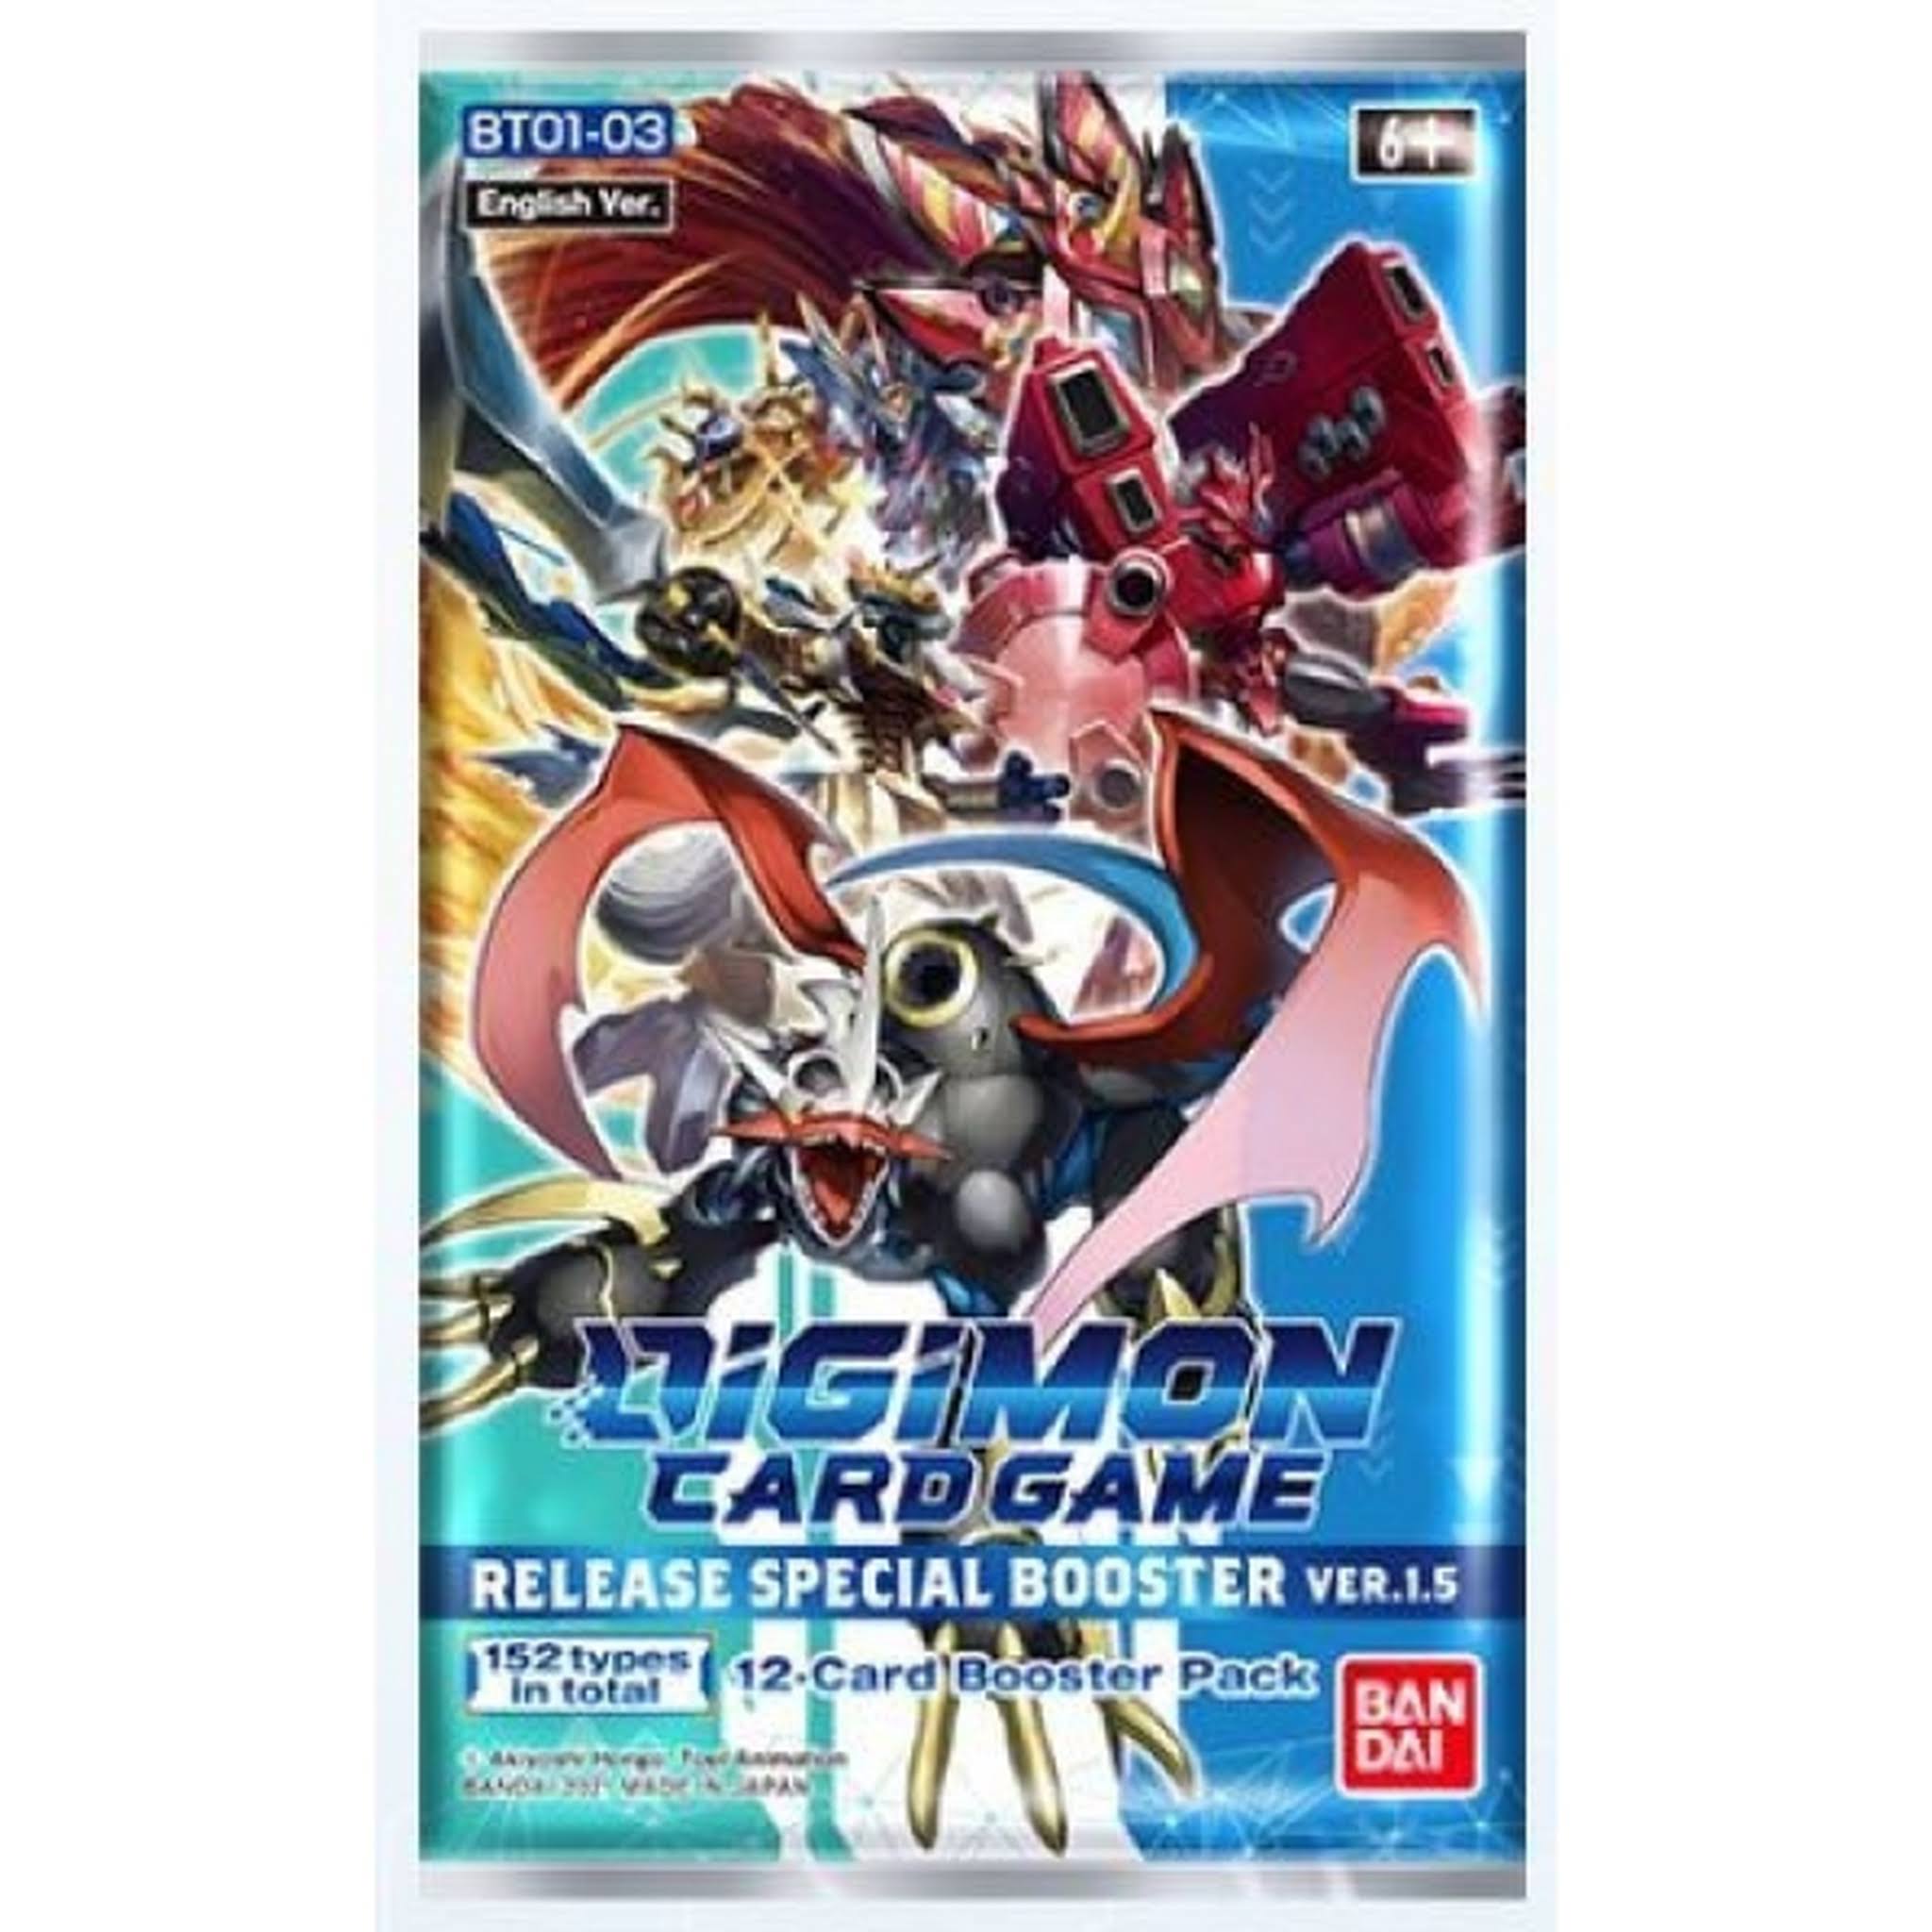 Digimon Release Special Booster Ver 1.5 Pack